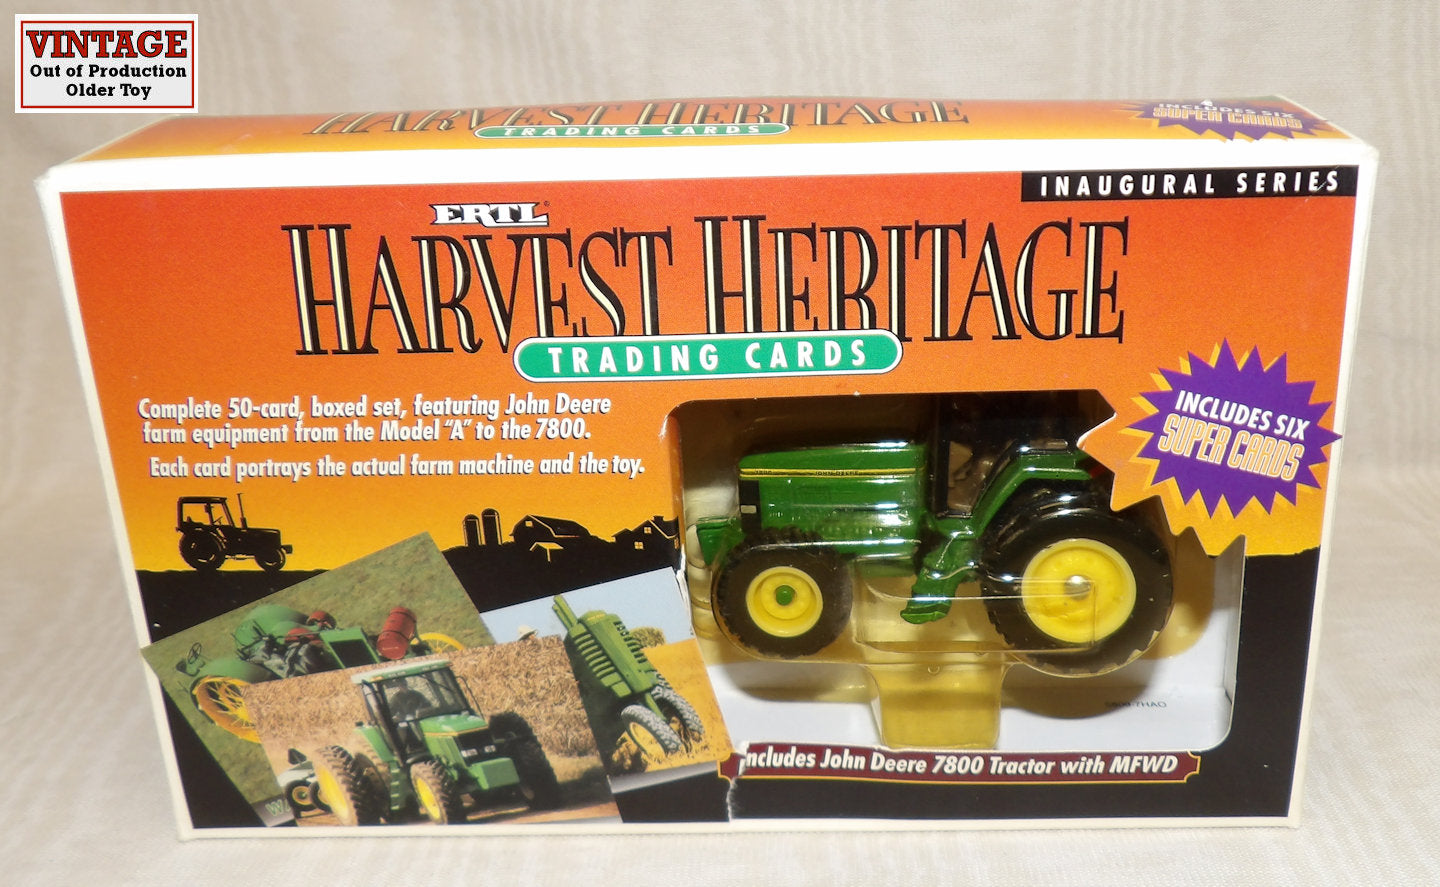 #5809 1/64 John Deere 7800 Tractor with MFWD and Harvest Heritage Trading Card Set